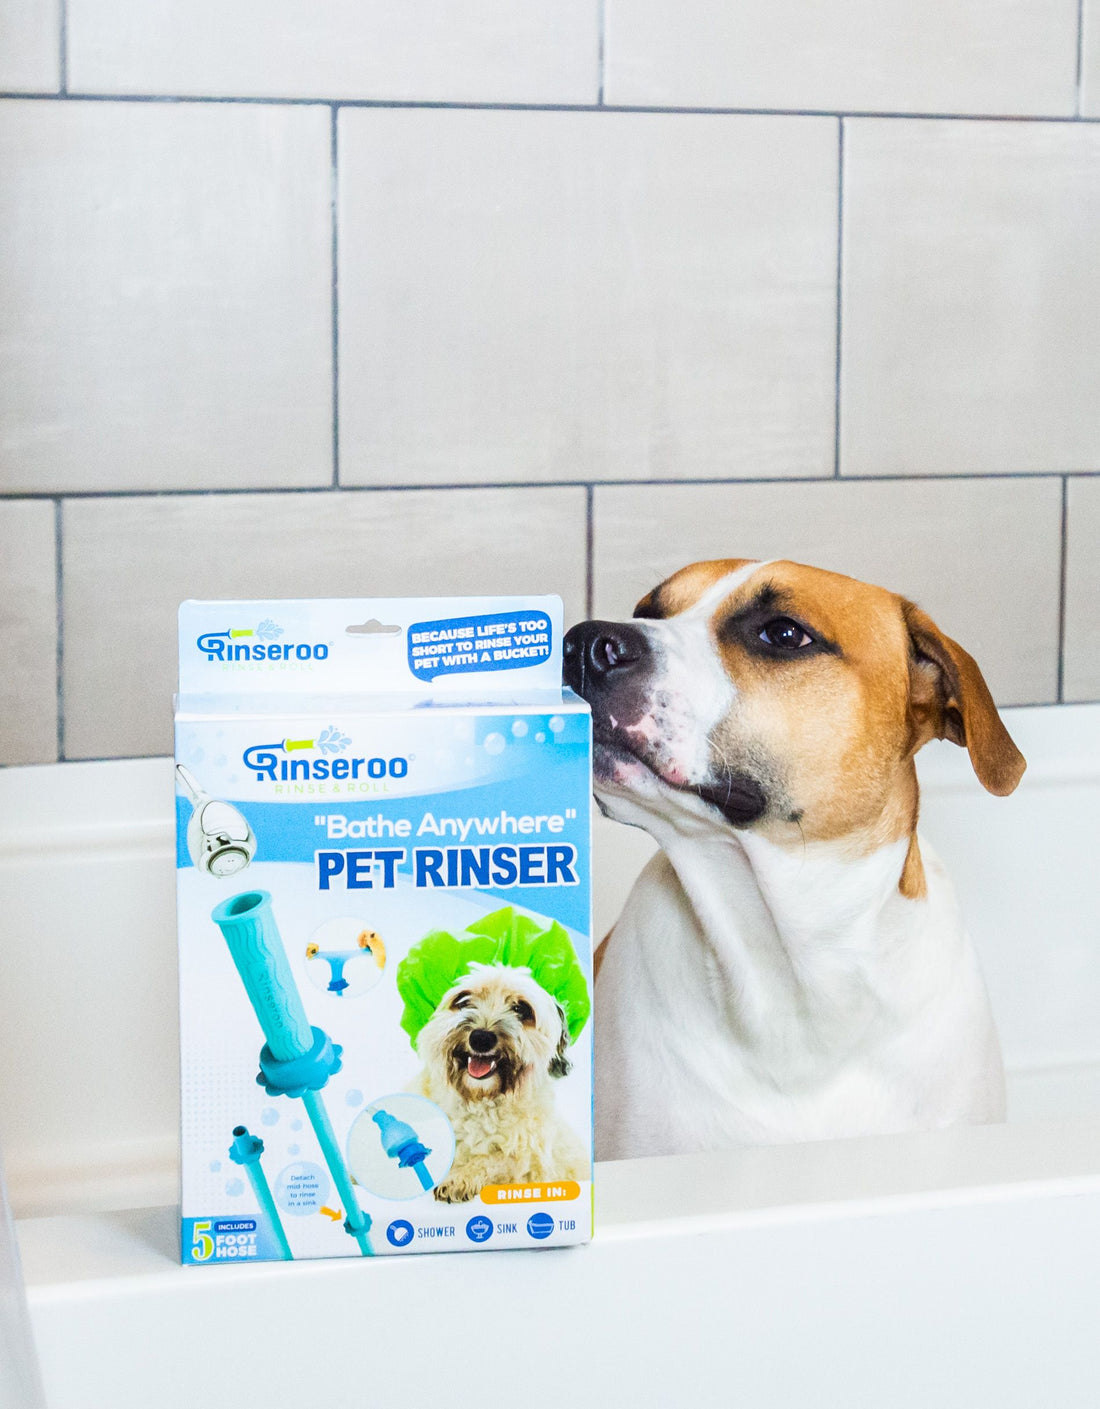 5 Dog Shower Attachments You Can Use To Wash Your Fur Babies